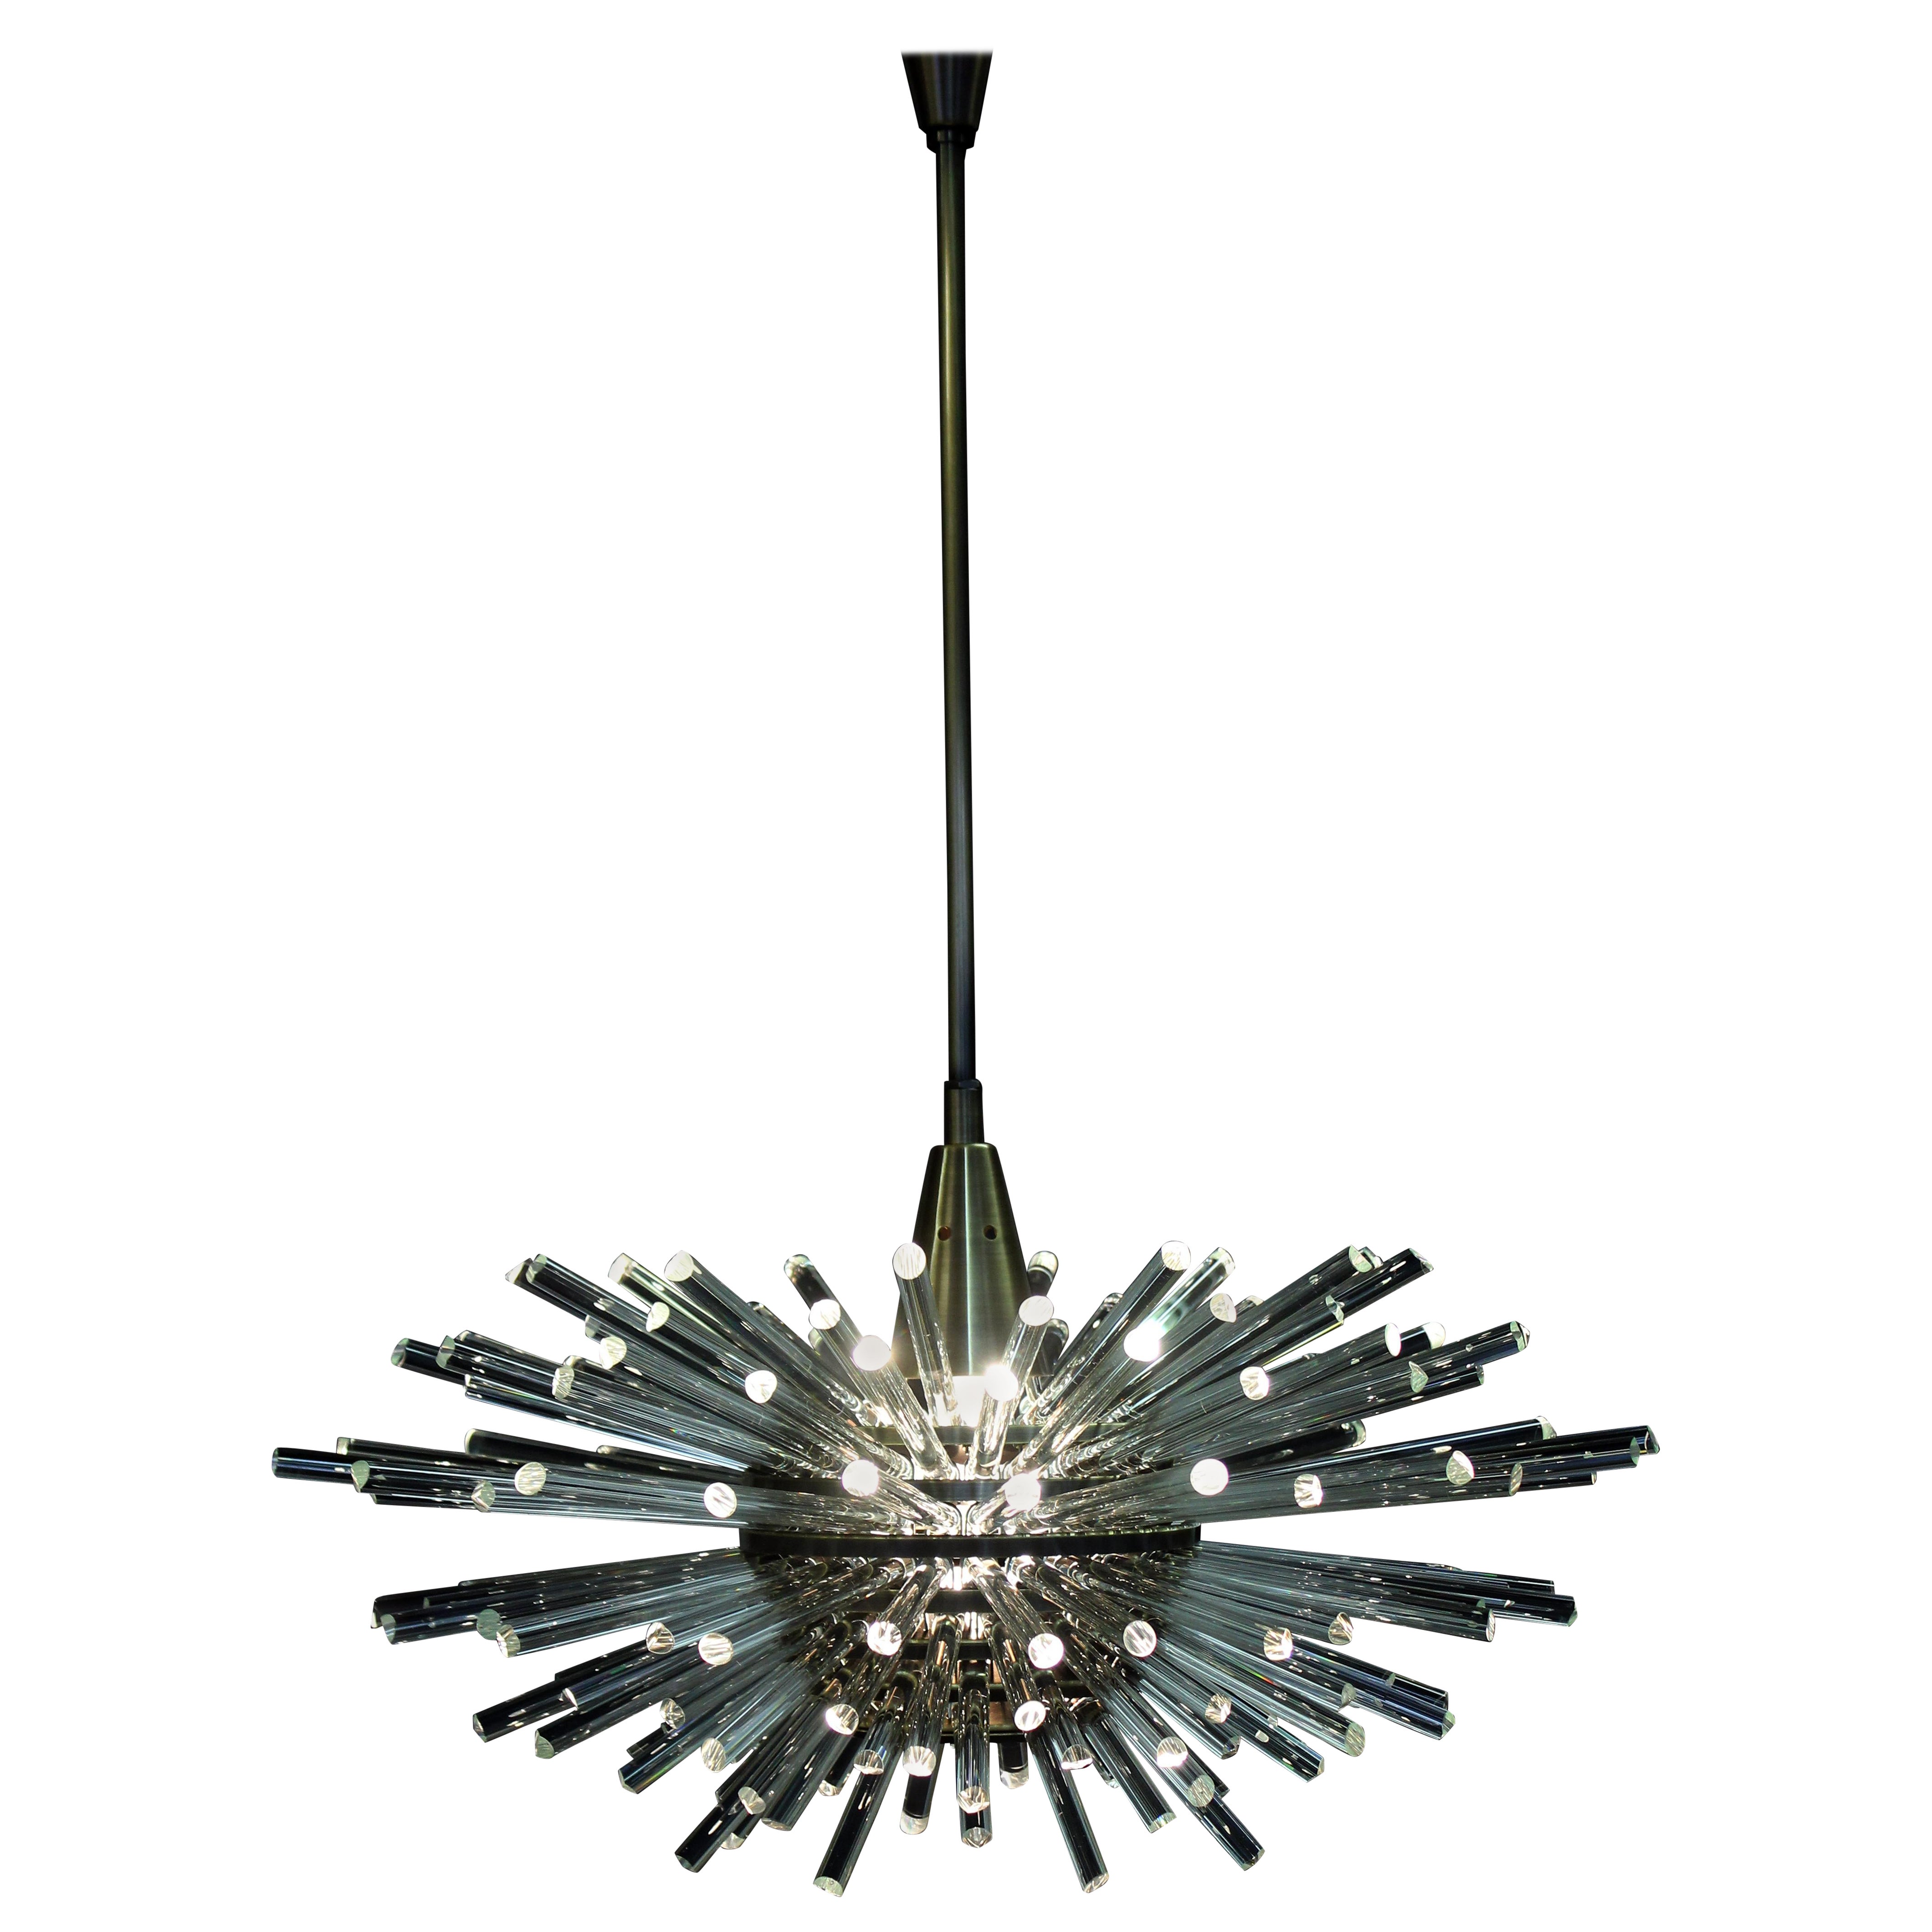 The Bakalowits world famous 1960 model Miracle chandelier